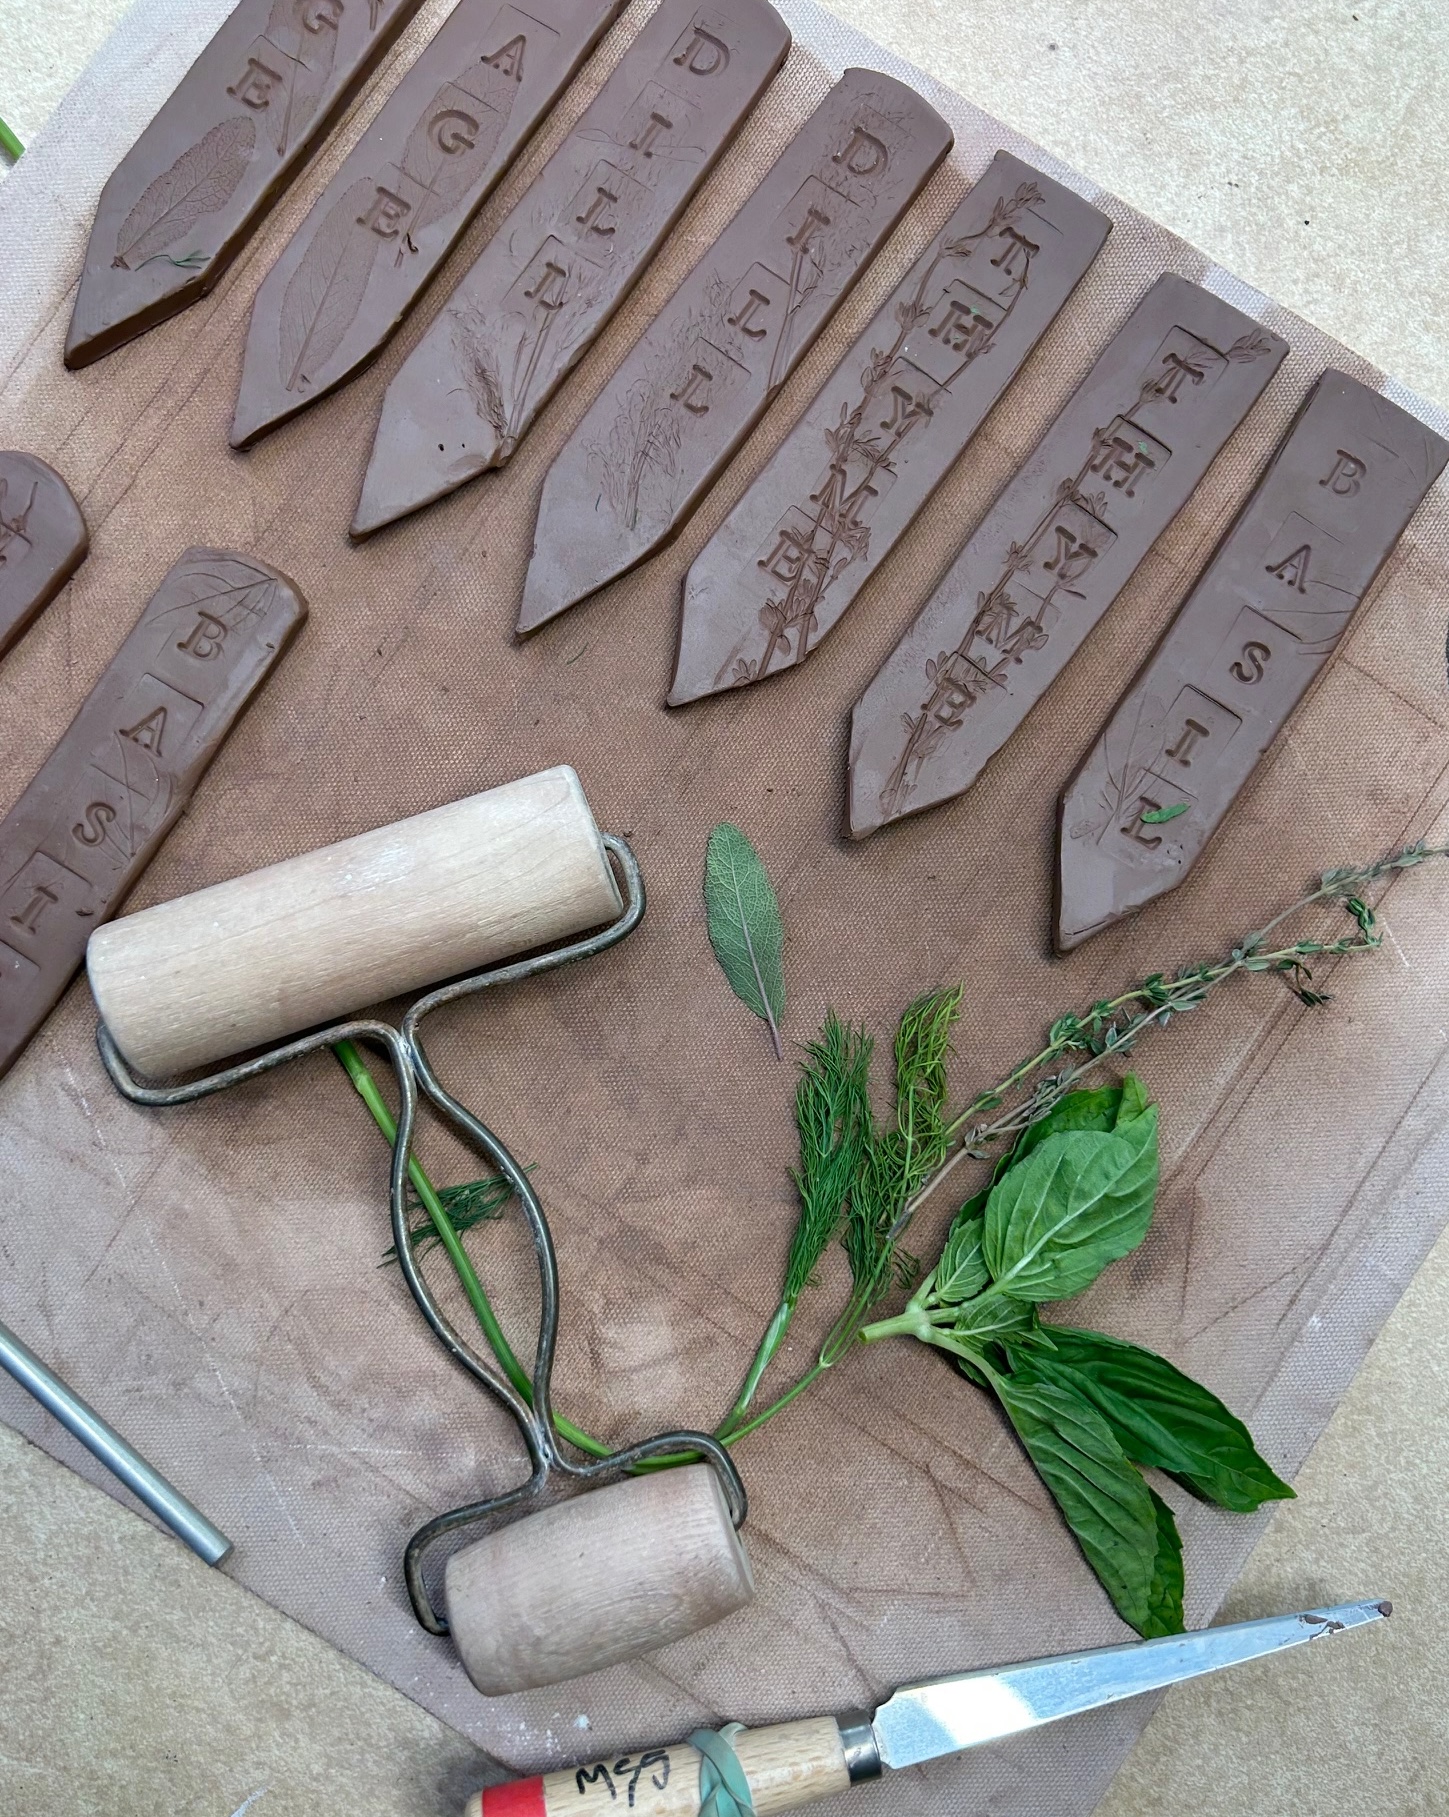 clay garden markers with fresh herbs and clay tools